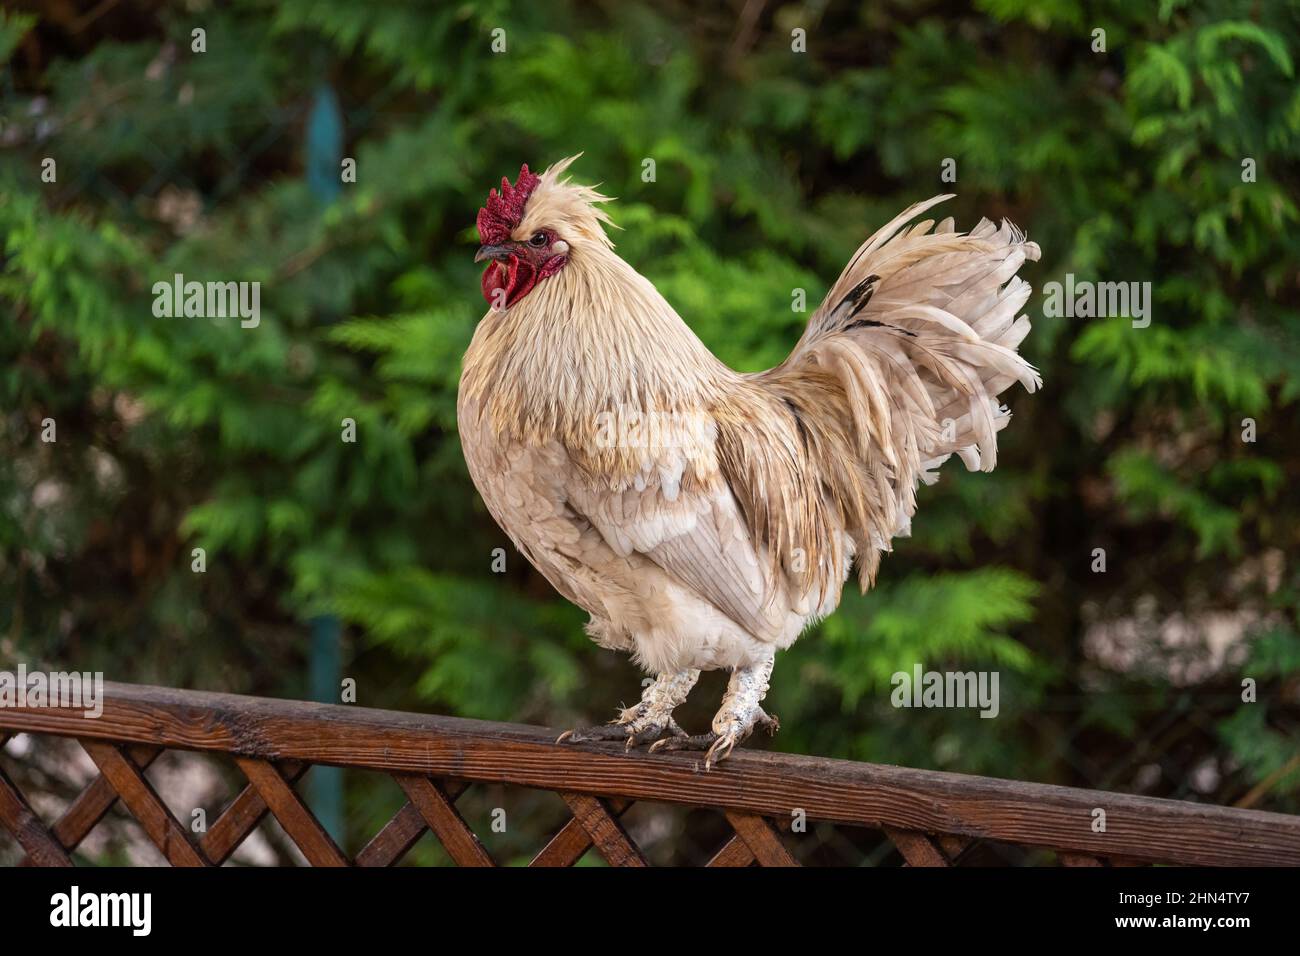 White rooster chicken on a wooden railing. Stock Photo